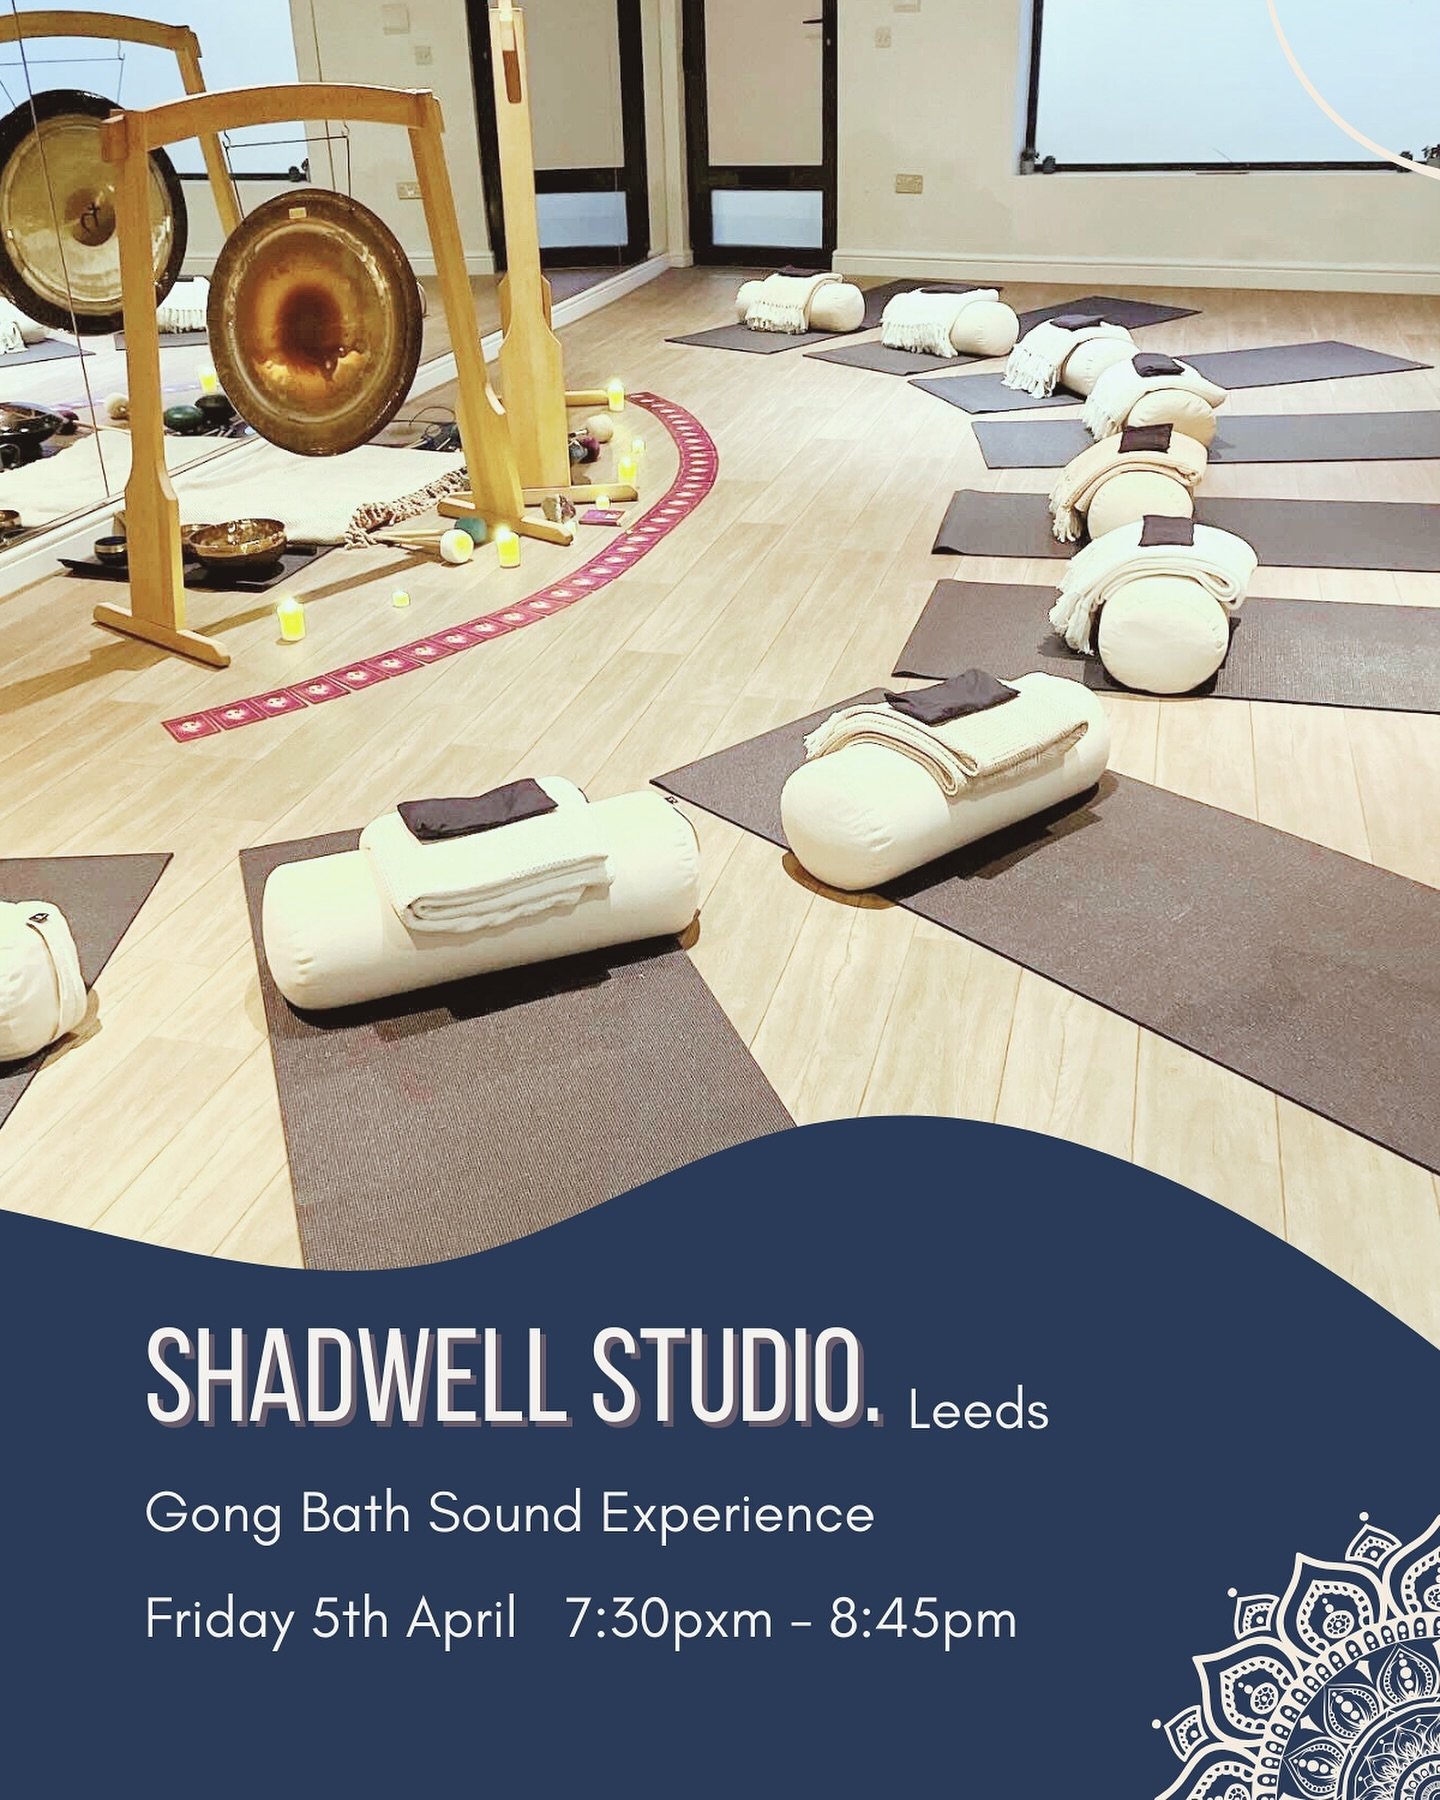 Gong Bath Experience! 

Friday 5th April
7:30-8:45pm

So many powerful benefits &hellip;

✨reduced stress

✨improved sleep quality 

✨deep meditation 

✨relief from anxiety 

✨calming the mind

✨increased sense of peace 

 Give yourself time to:

💫p